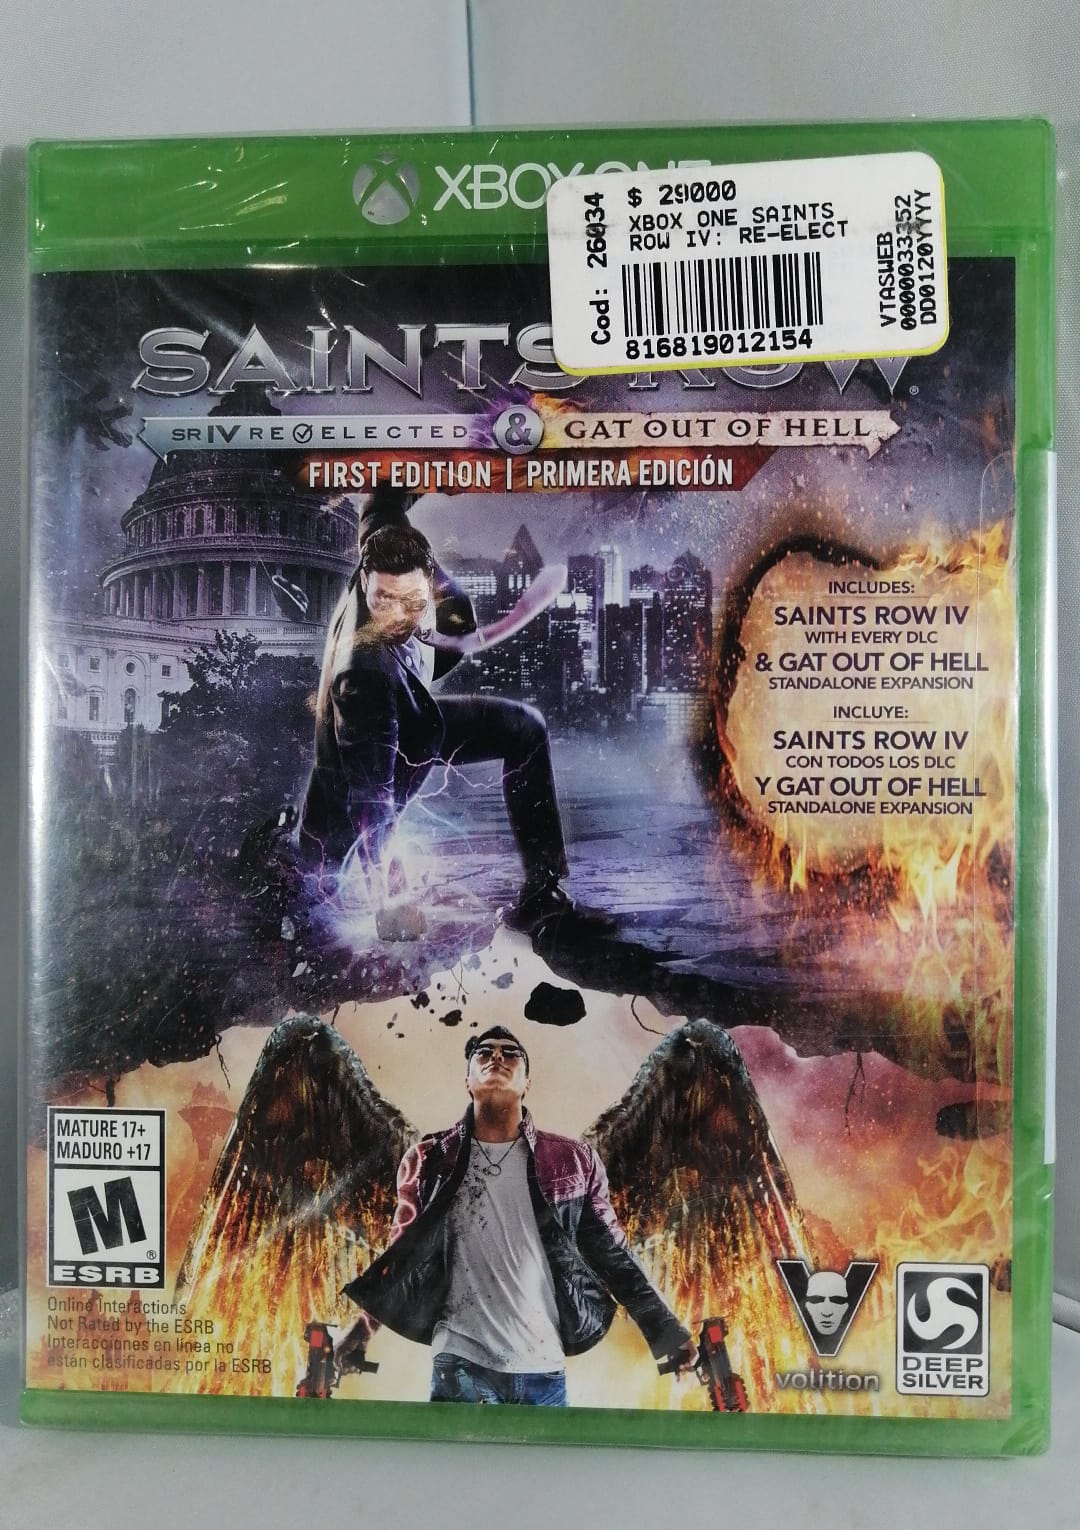 Juego consola xbox one saints row IV: re-elected